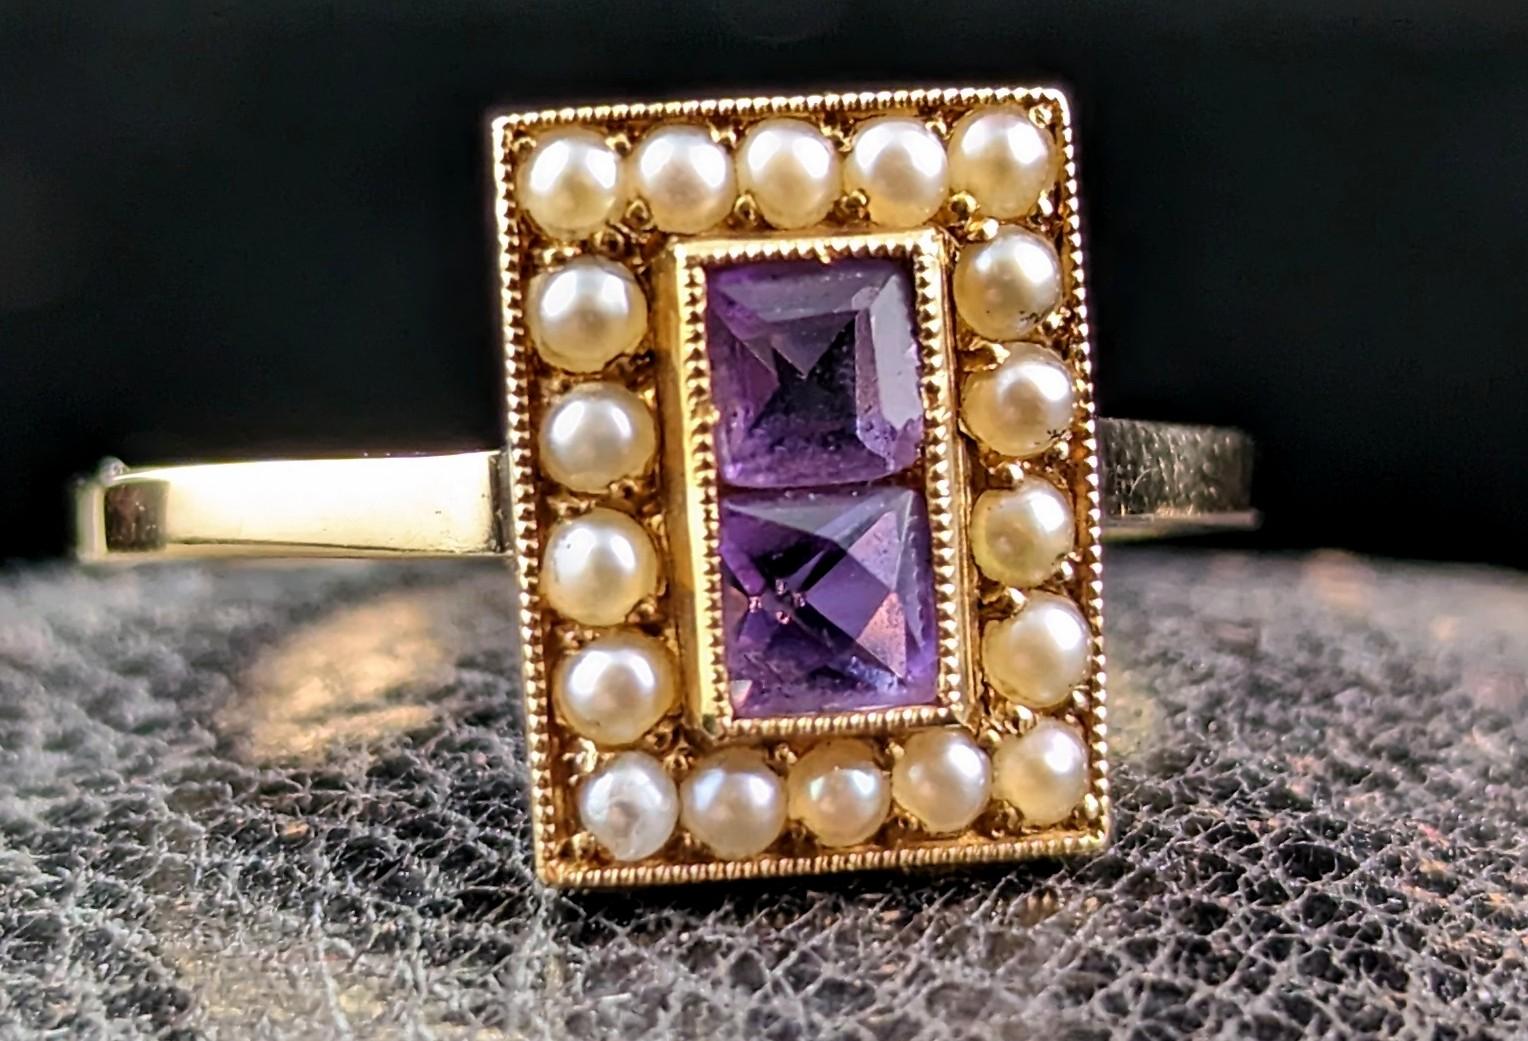 This stunning antique Art Deco era cocktail ring has everything going for it.

Two beautiful rich purple mixed cut Amethyst stones set to the centre, one above the other, surrounded by a halo of pretty creamy seed pearls.

Such a delight and an